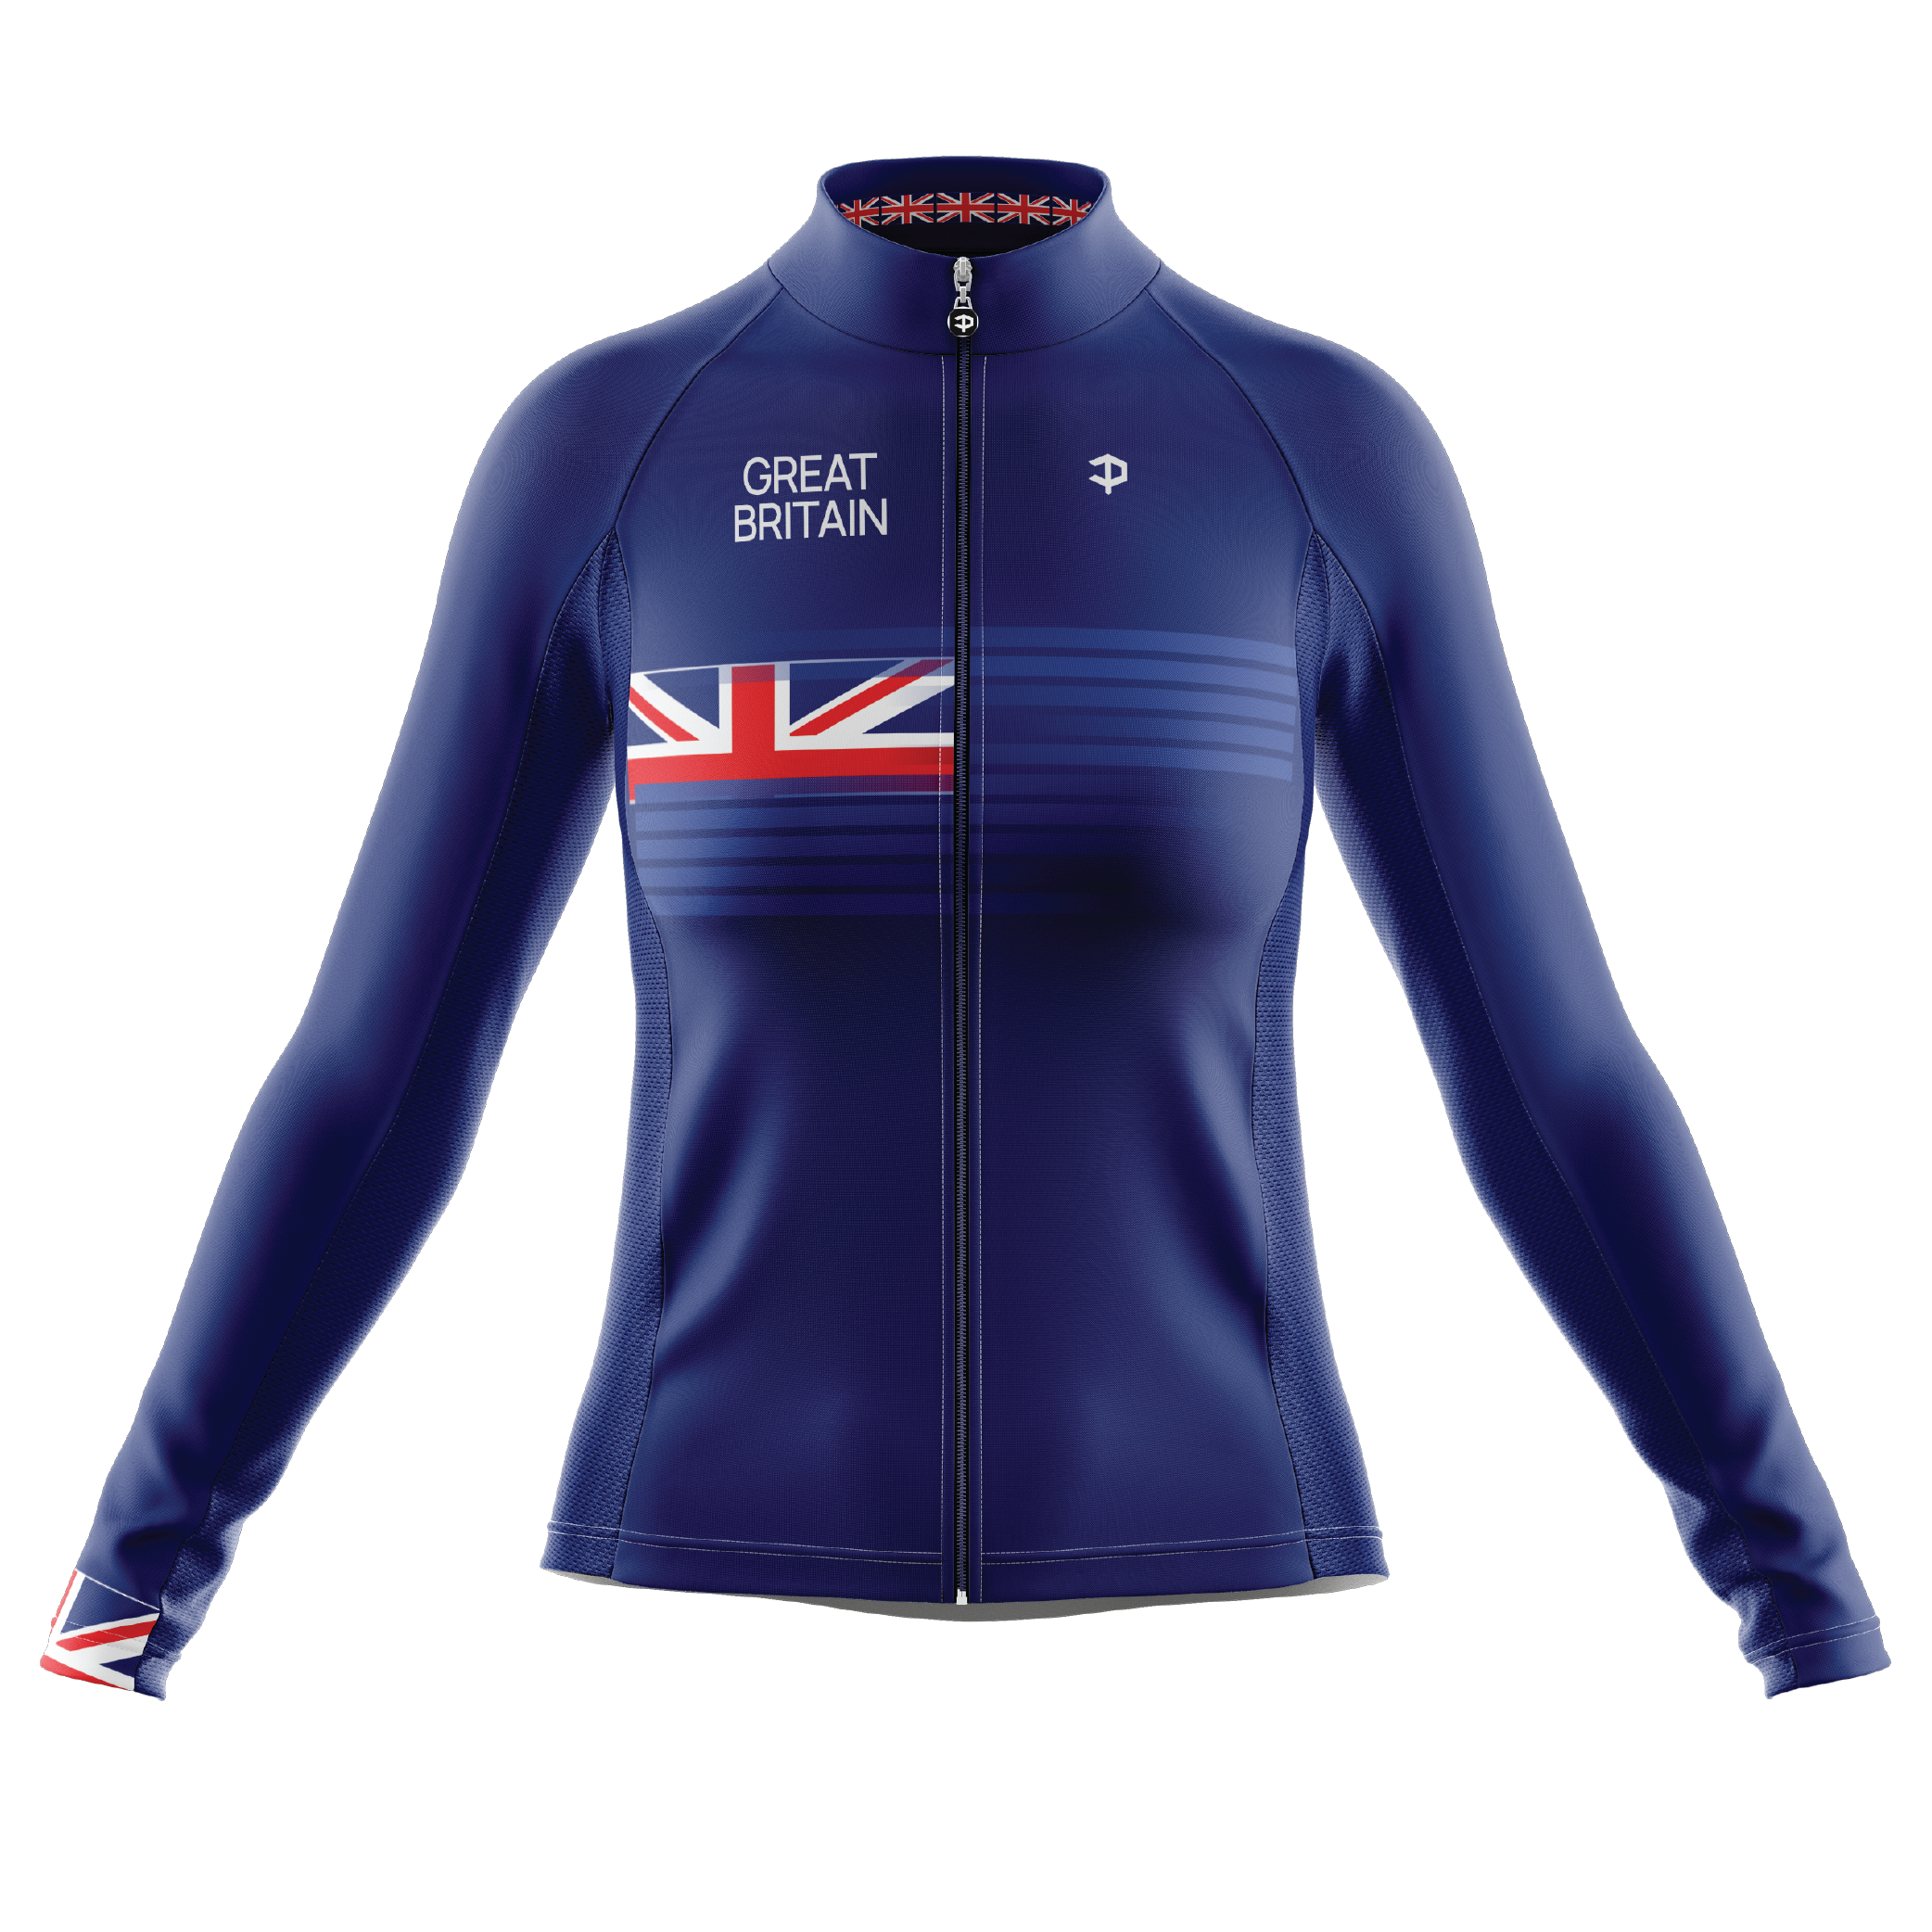 Great Britain V3 Long Sleeve Cycling Jersey